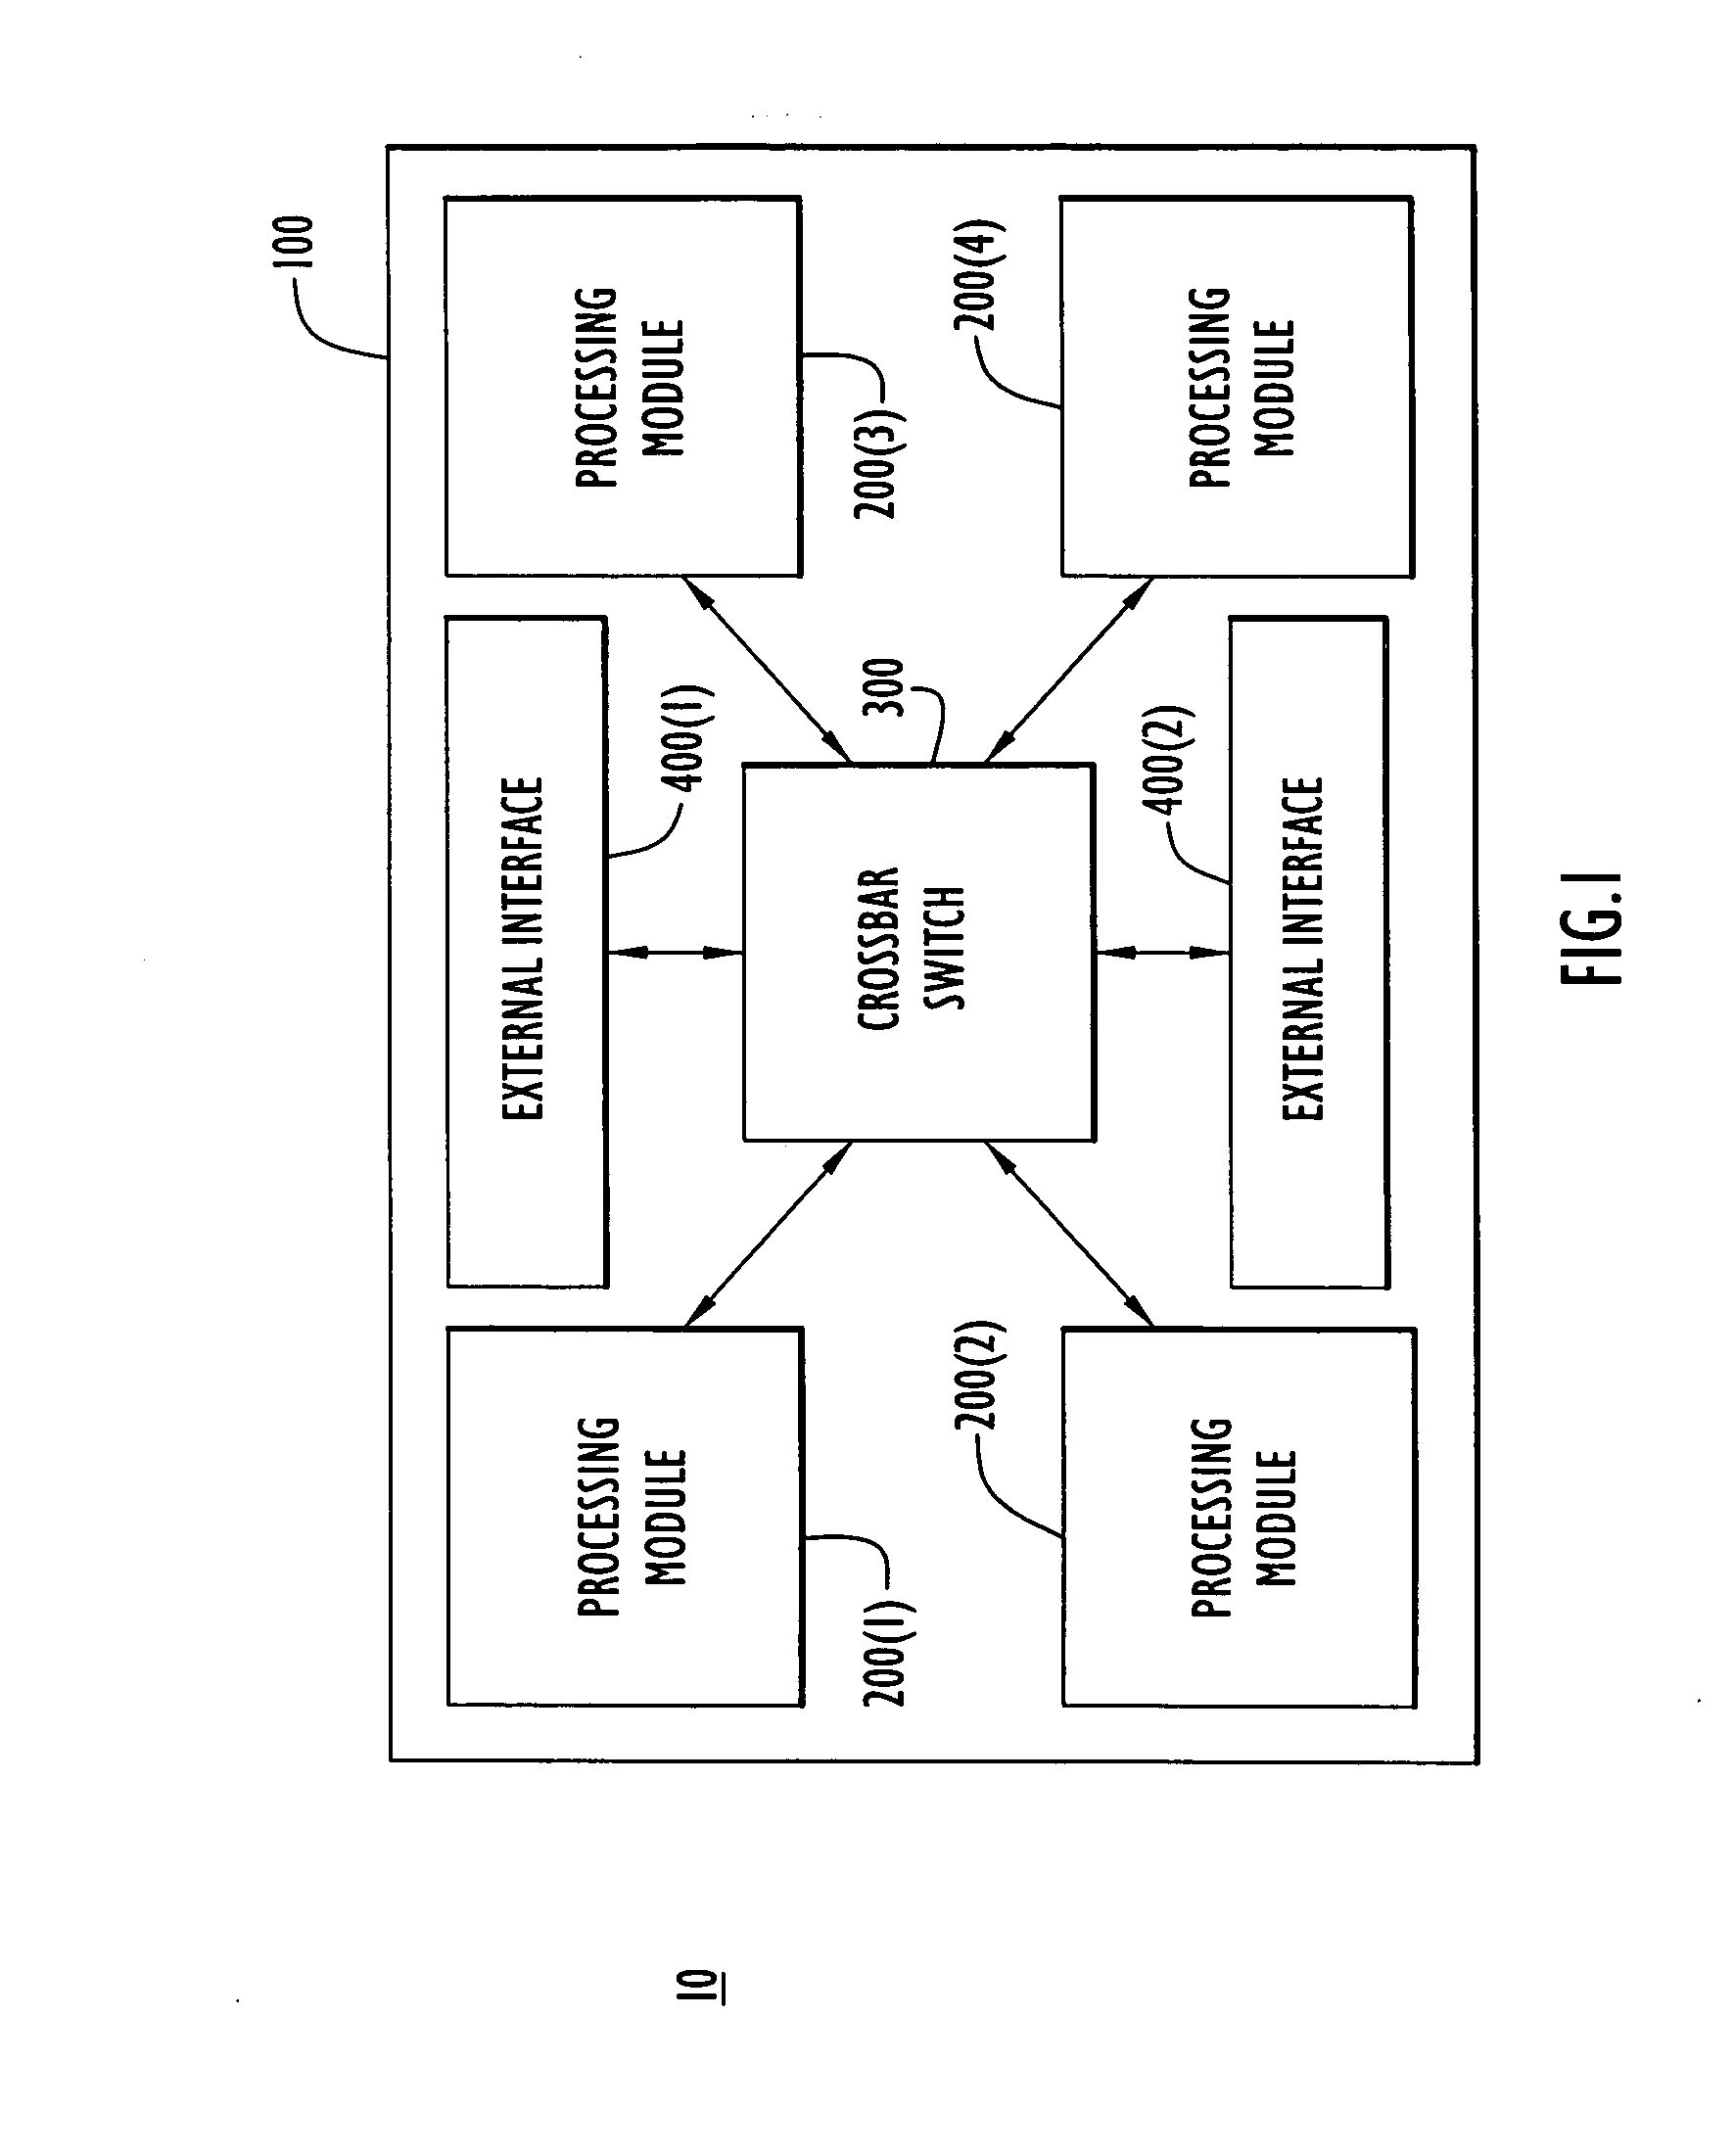 Reconfigurable data processing system